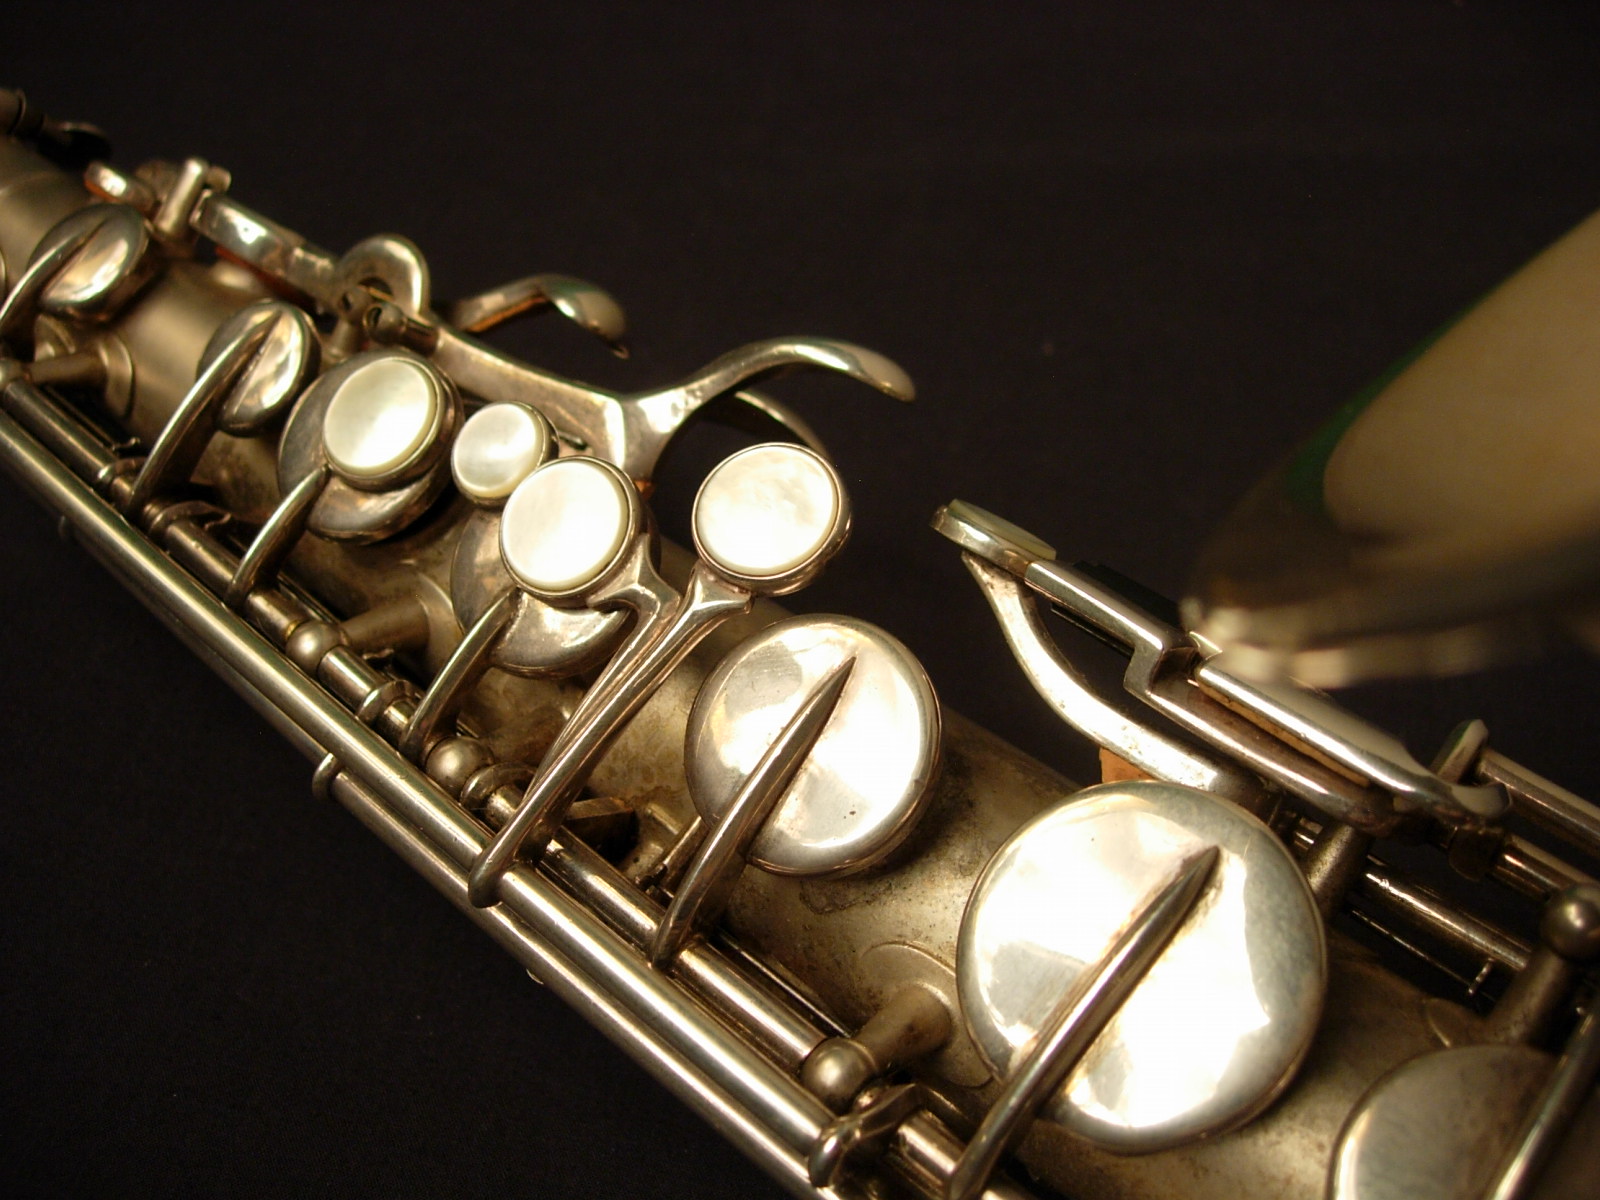 The Form Below To Delete This Buescher Truetone Alto Sax Image From